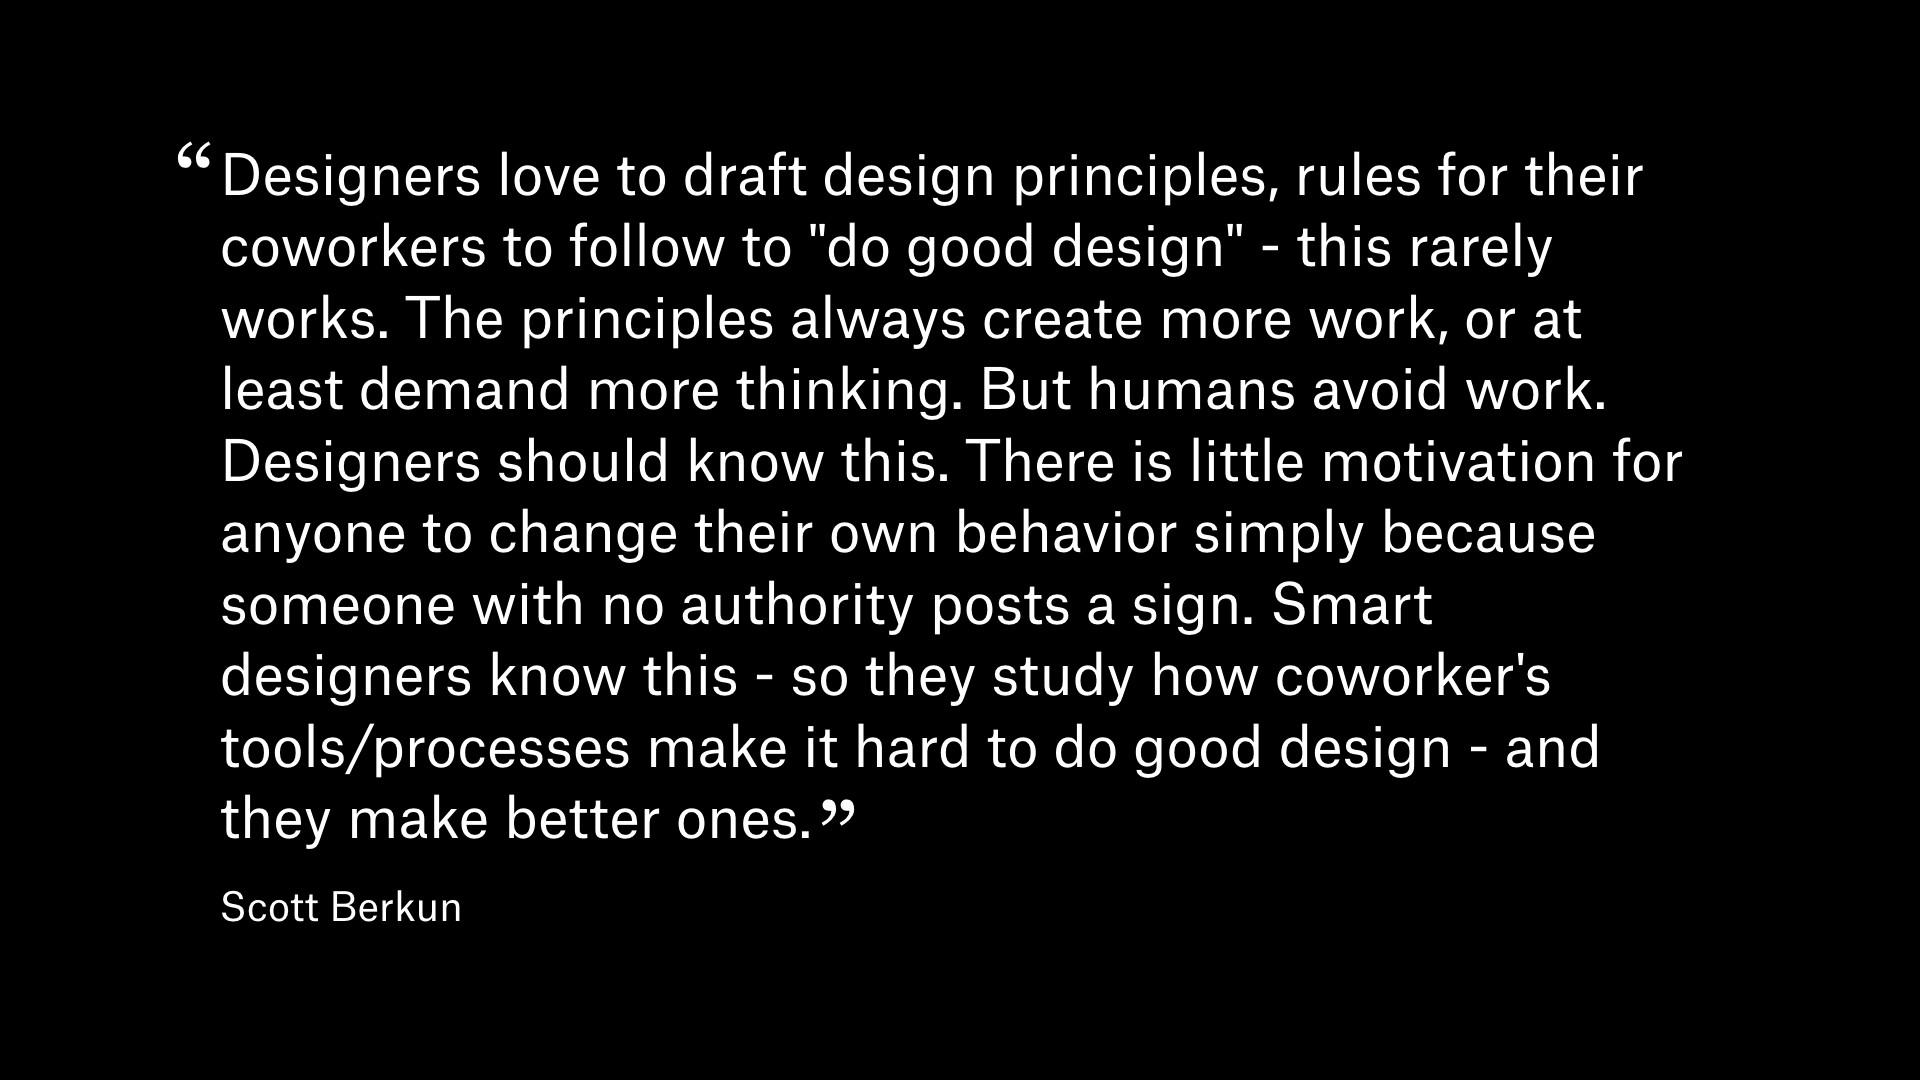 Quote by Scott Berkun: Designers love to draft design principles, rules for their coworker to follow to 'do good design' - this rarely works. The principles always create more work, or at least demand more thinking. But humans avoid work. Designers should know this. There is little motivation for anyone to change their own behavior simply because someone with no authority posts a sign. Smart designers know this - so they study how coworker's tools/processes make it hard to do good design - and they make better ones.